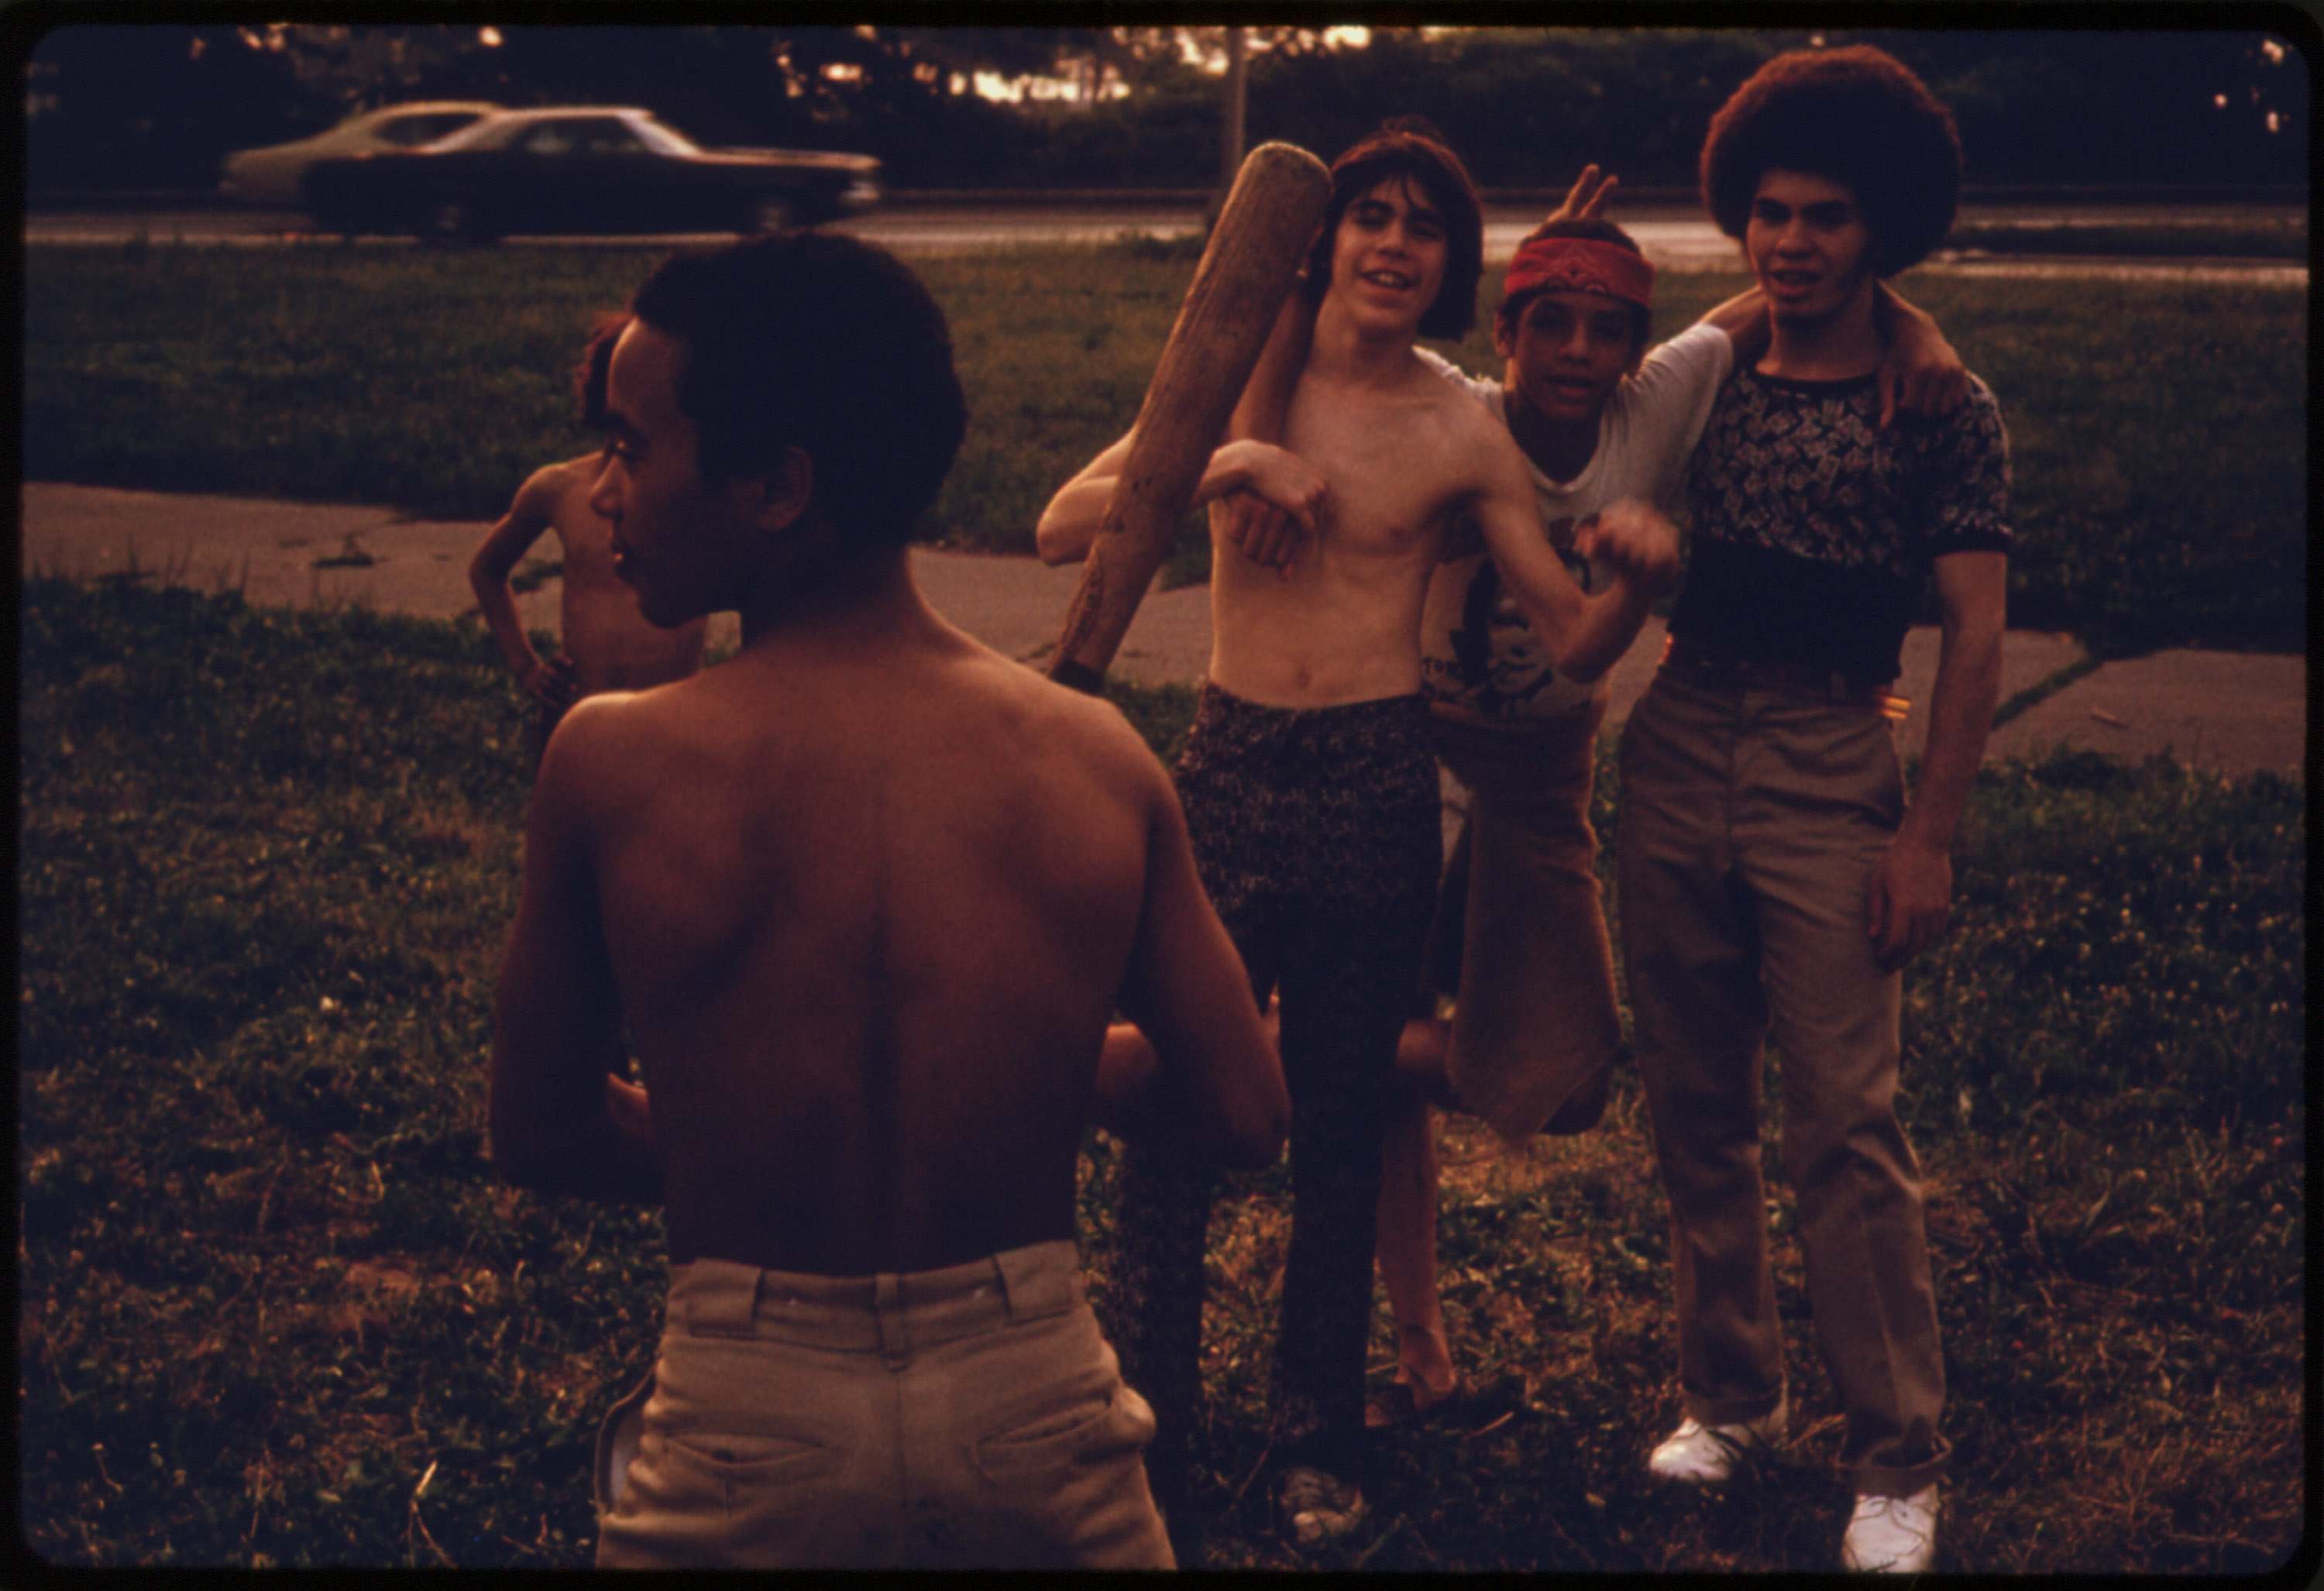 Puerto-Rican boys playing softball in Brooklyn's Hiland Park, July 1974.